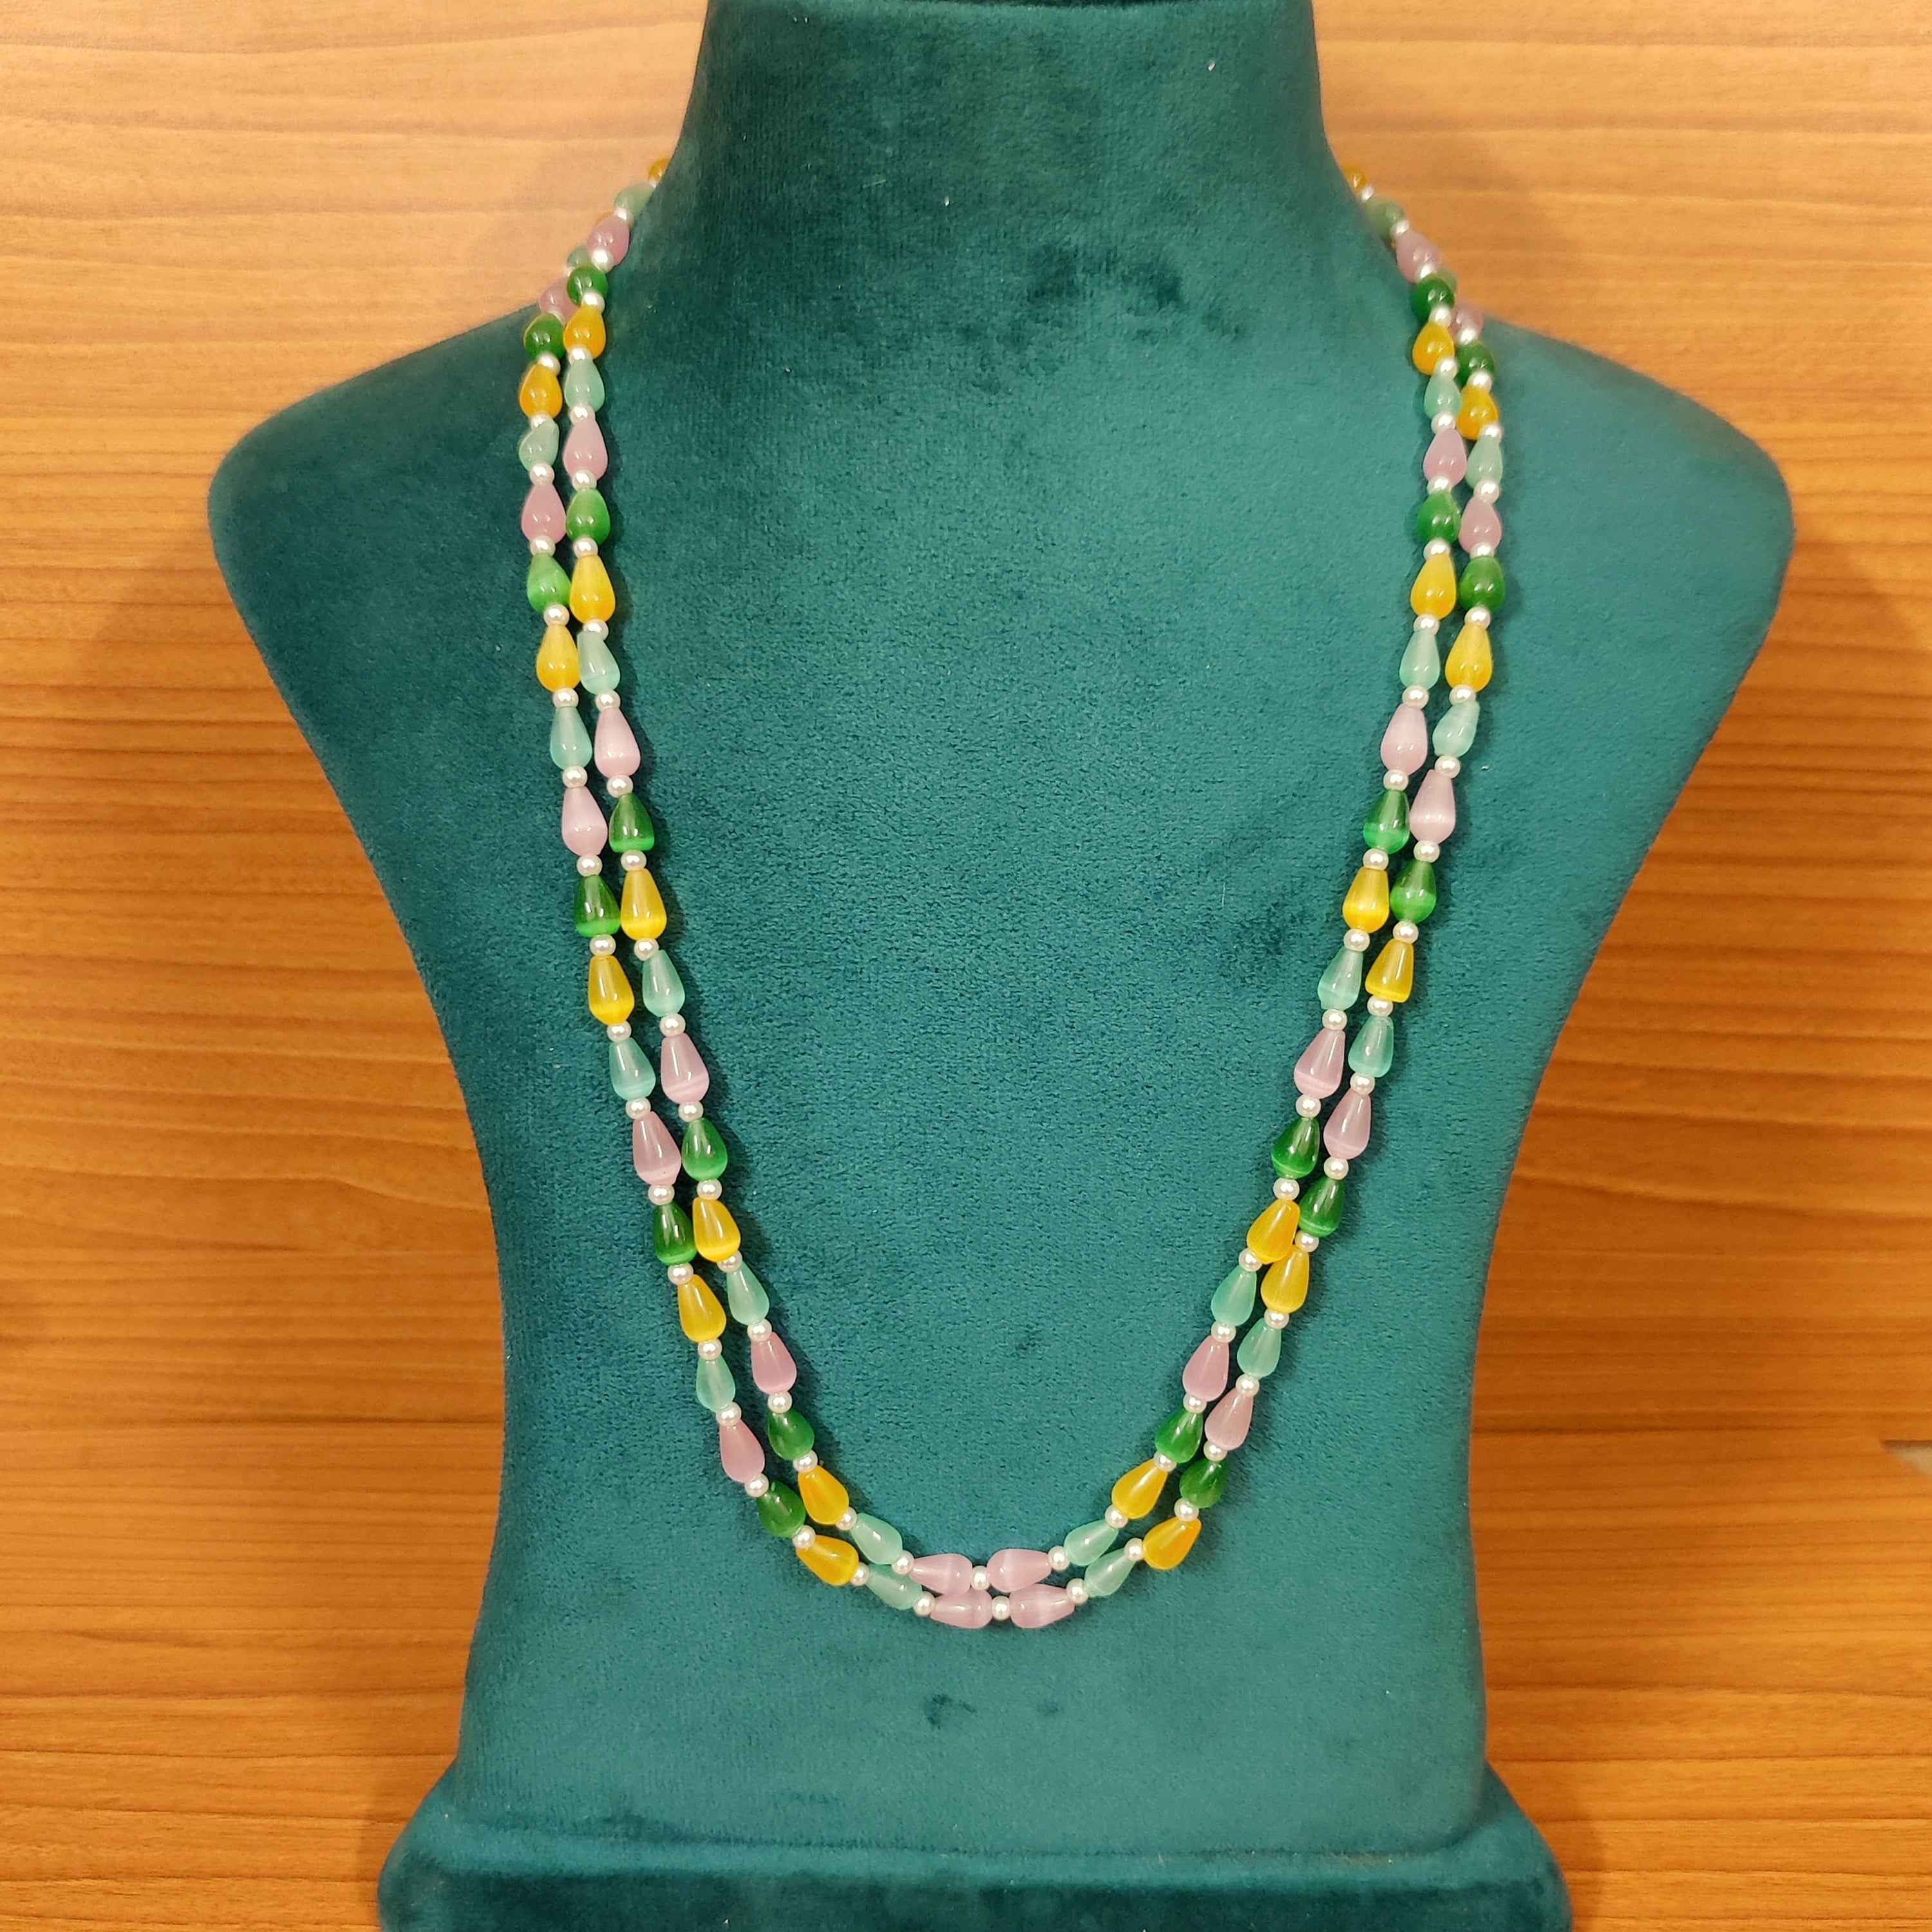 Lucy Multi Mix Short Beaded Necklace Pink and Green – INK+ALLOY, LLC